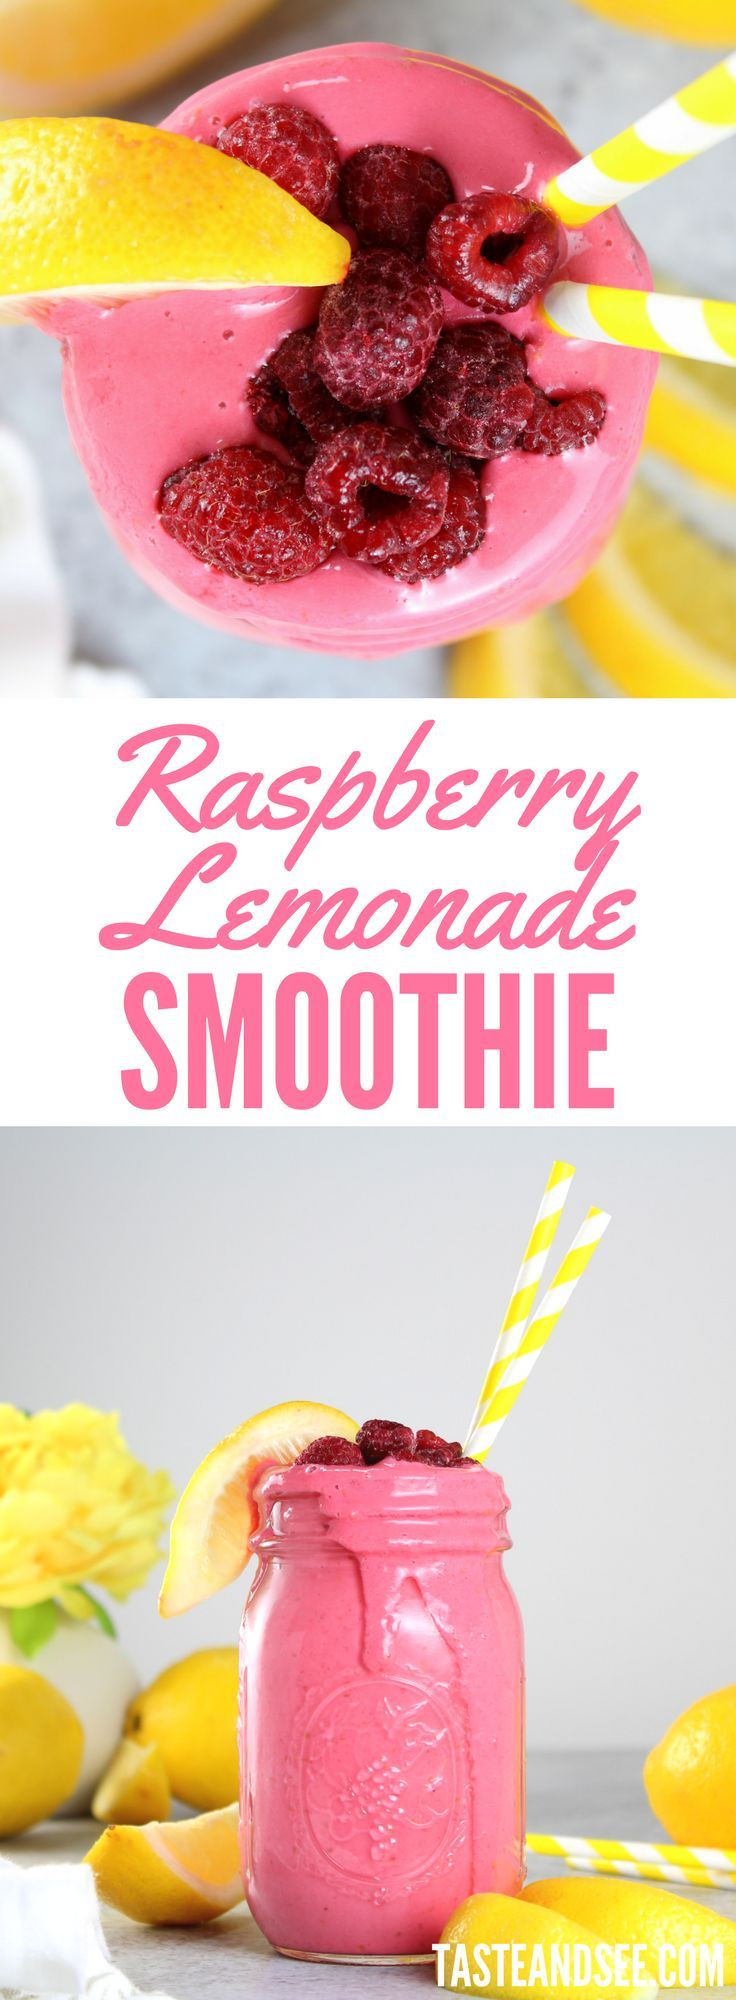 Low Calorie High Protein Smoothies Recipes
 25 best ideas about Low calorie smoothies on Pinterest